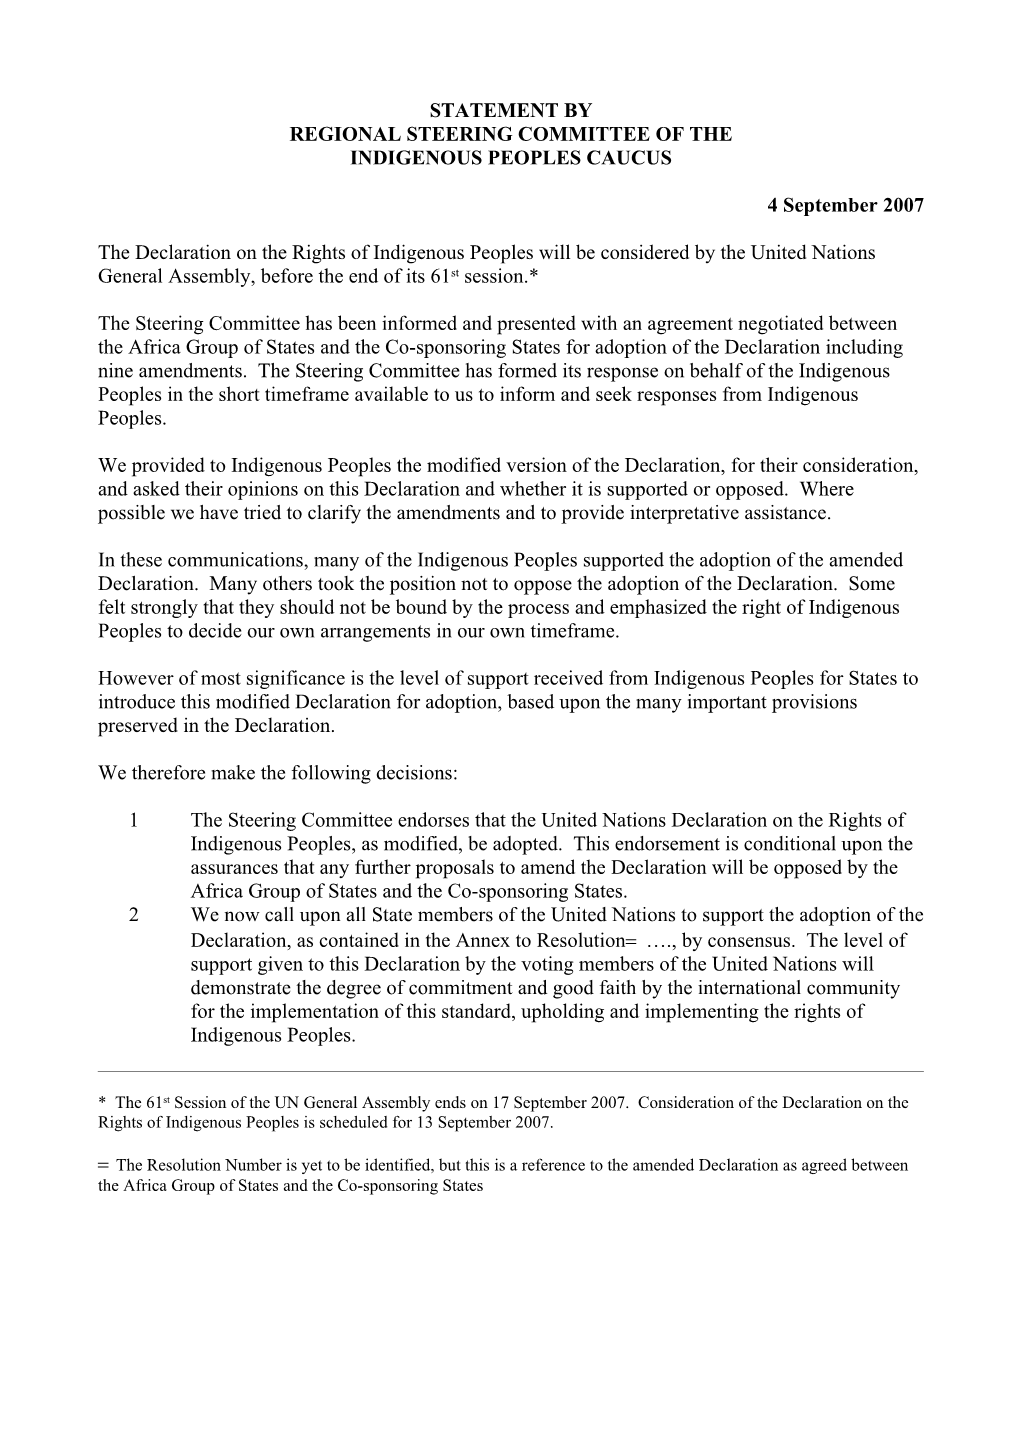 The Declaration on the Rights of Indigenous Peoples Will Be Considered by the United Nations